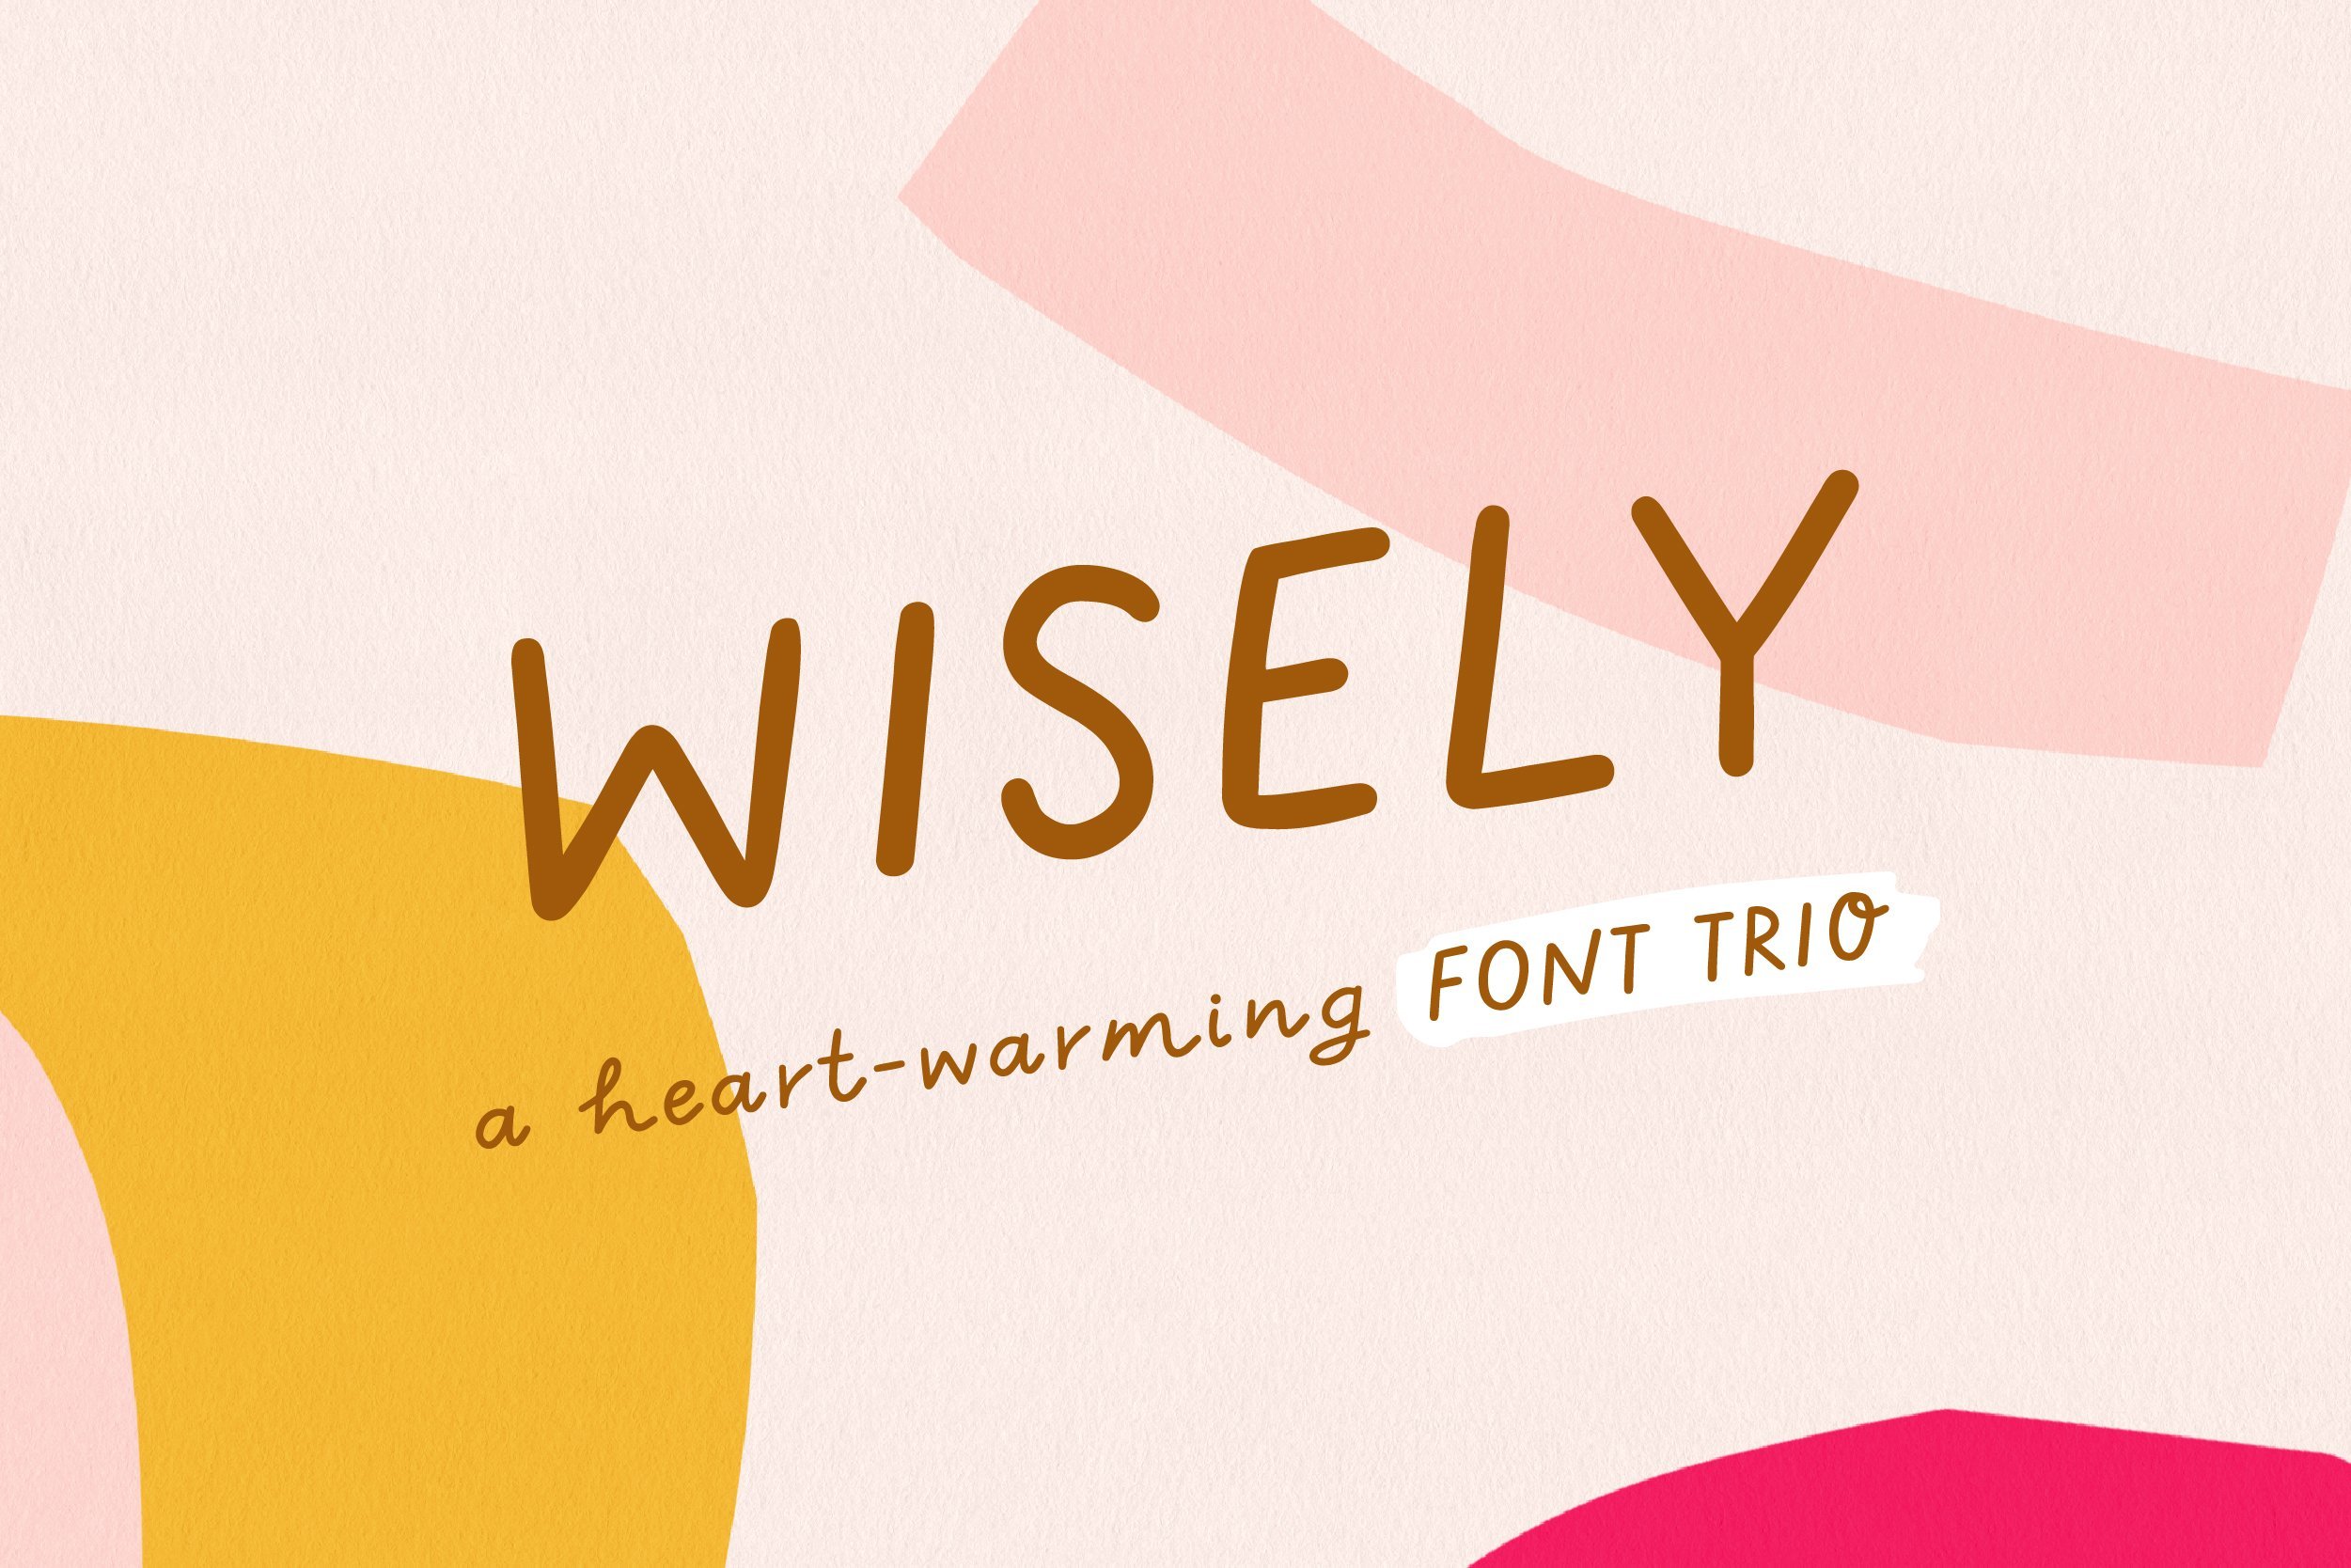 The Crafty, Creative Font Collection